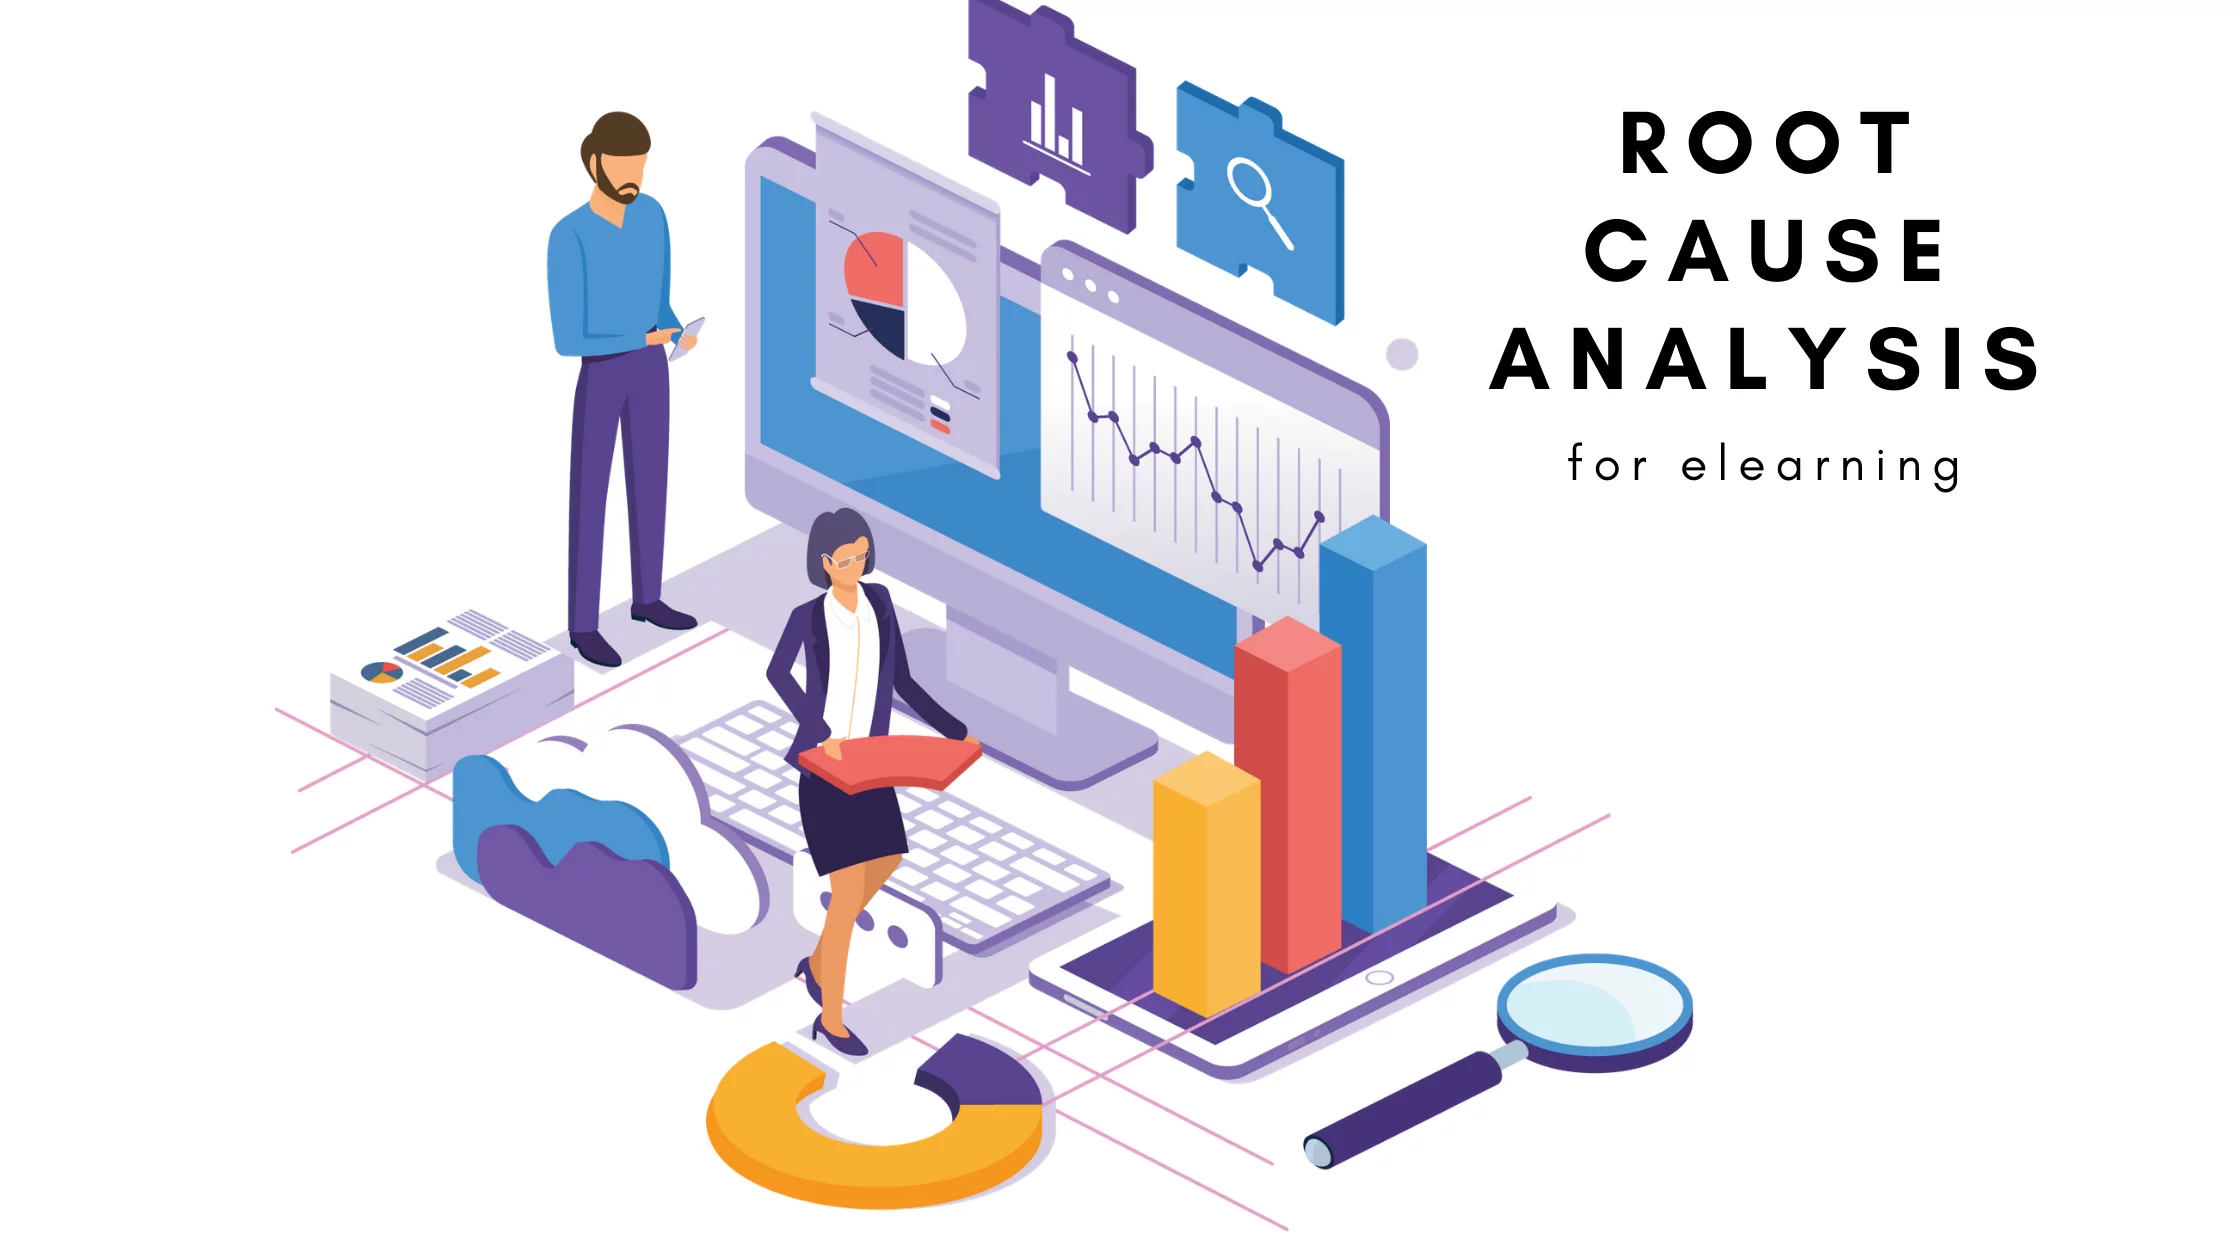 Root cause analysis for elearning objectives